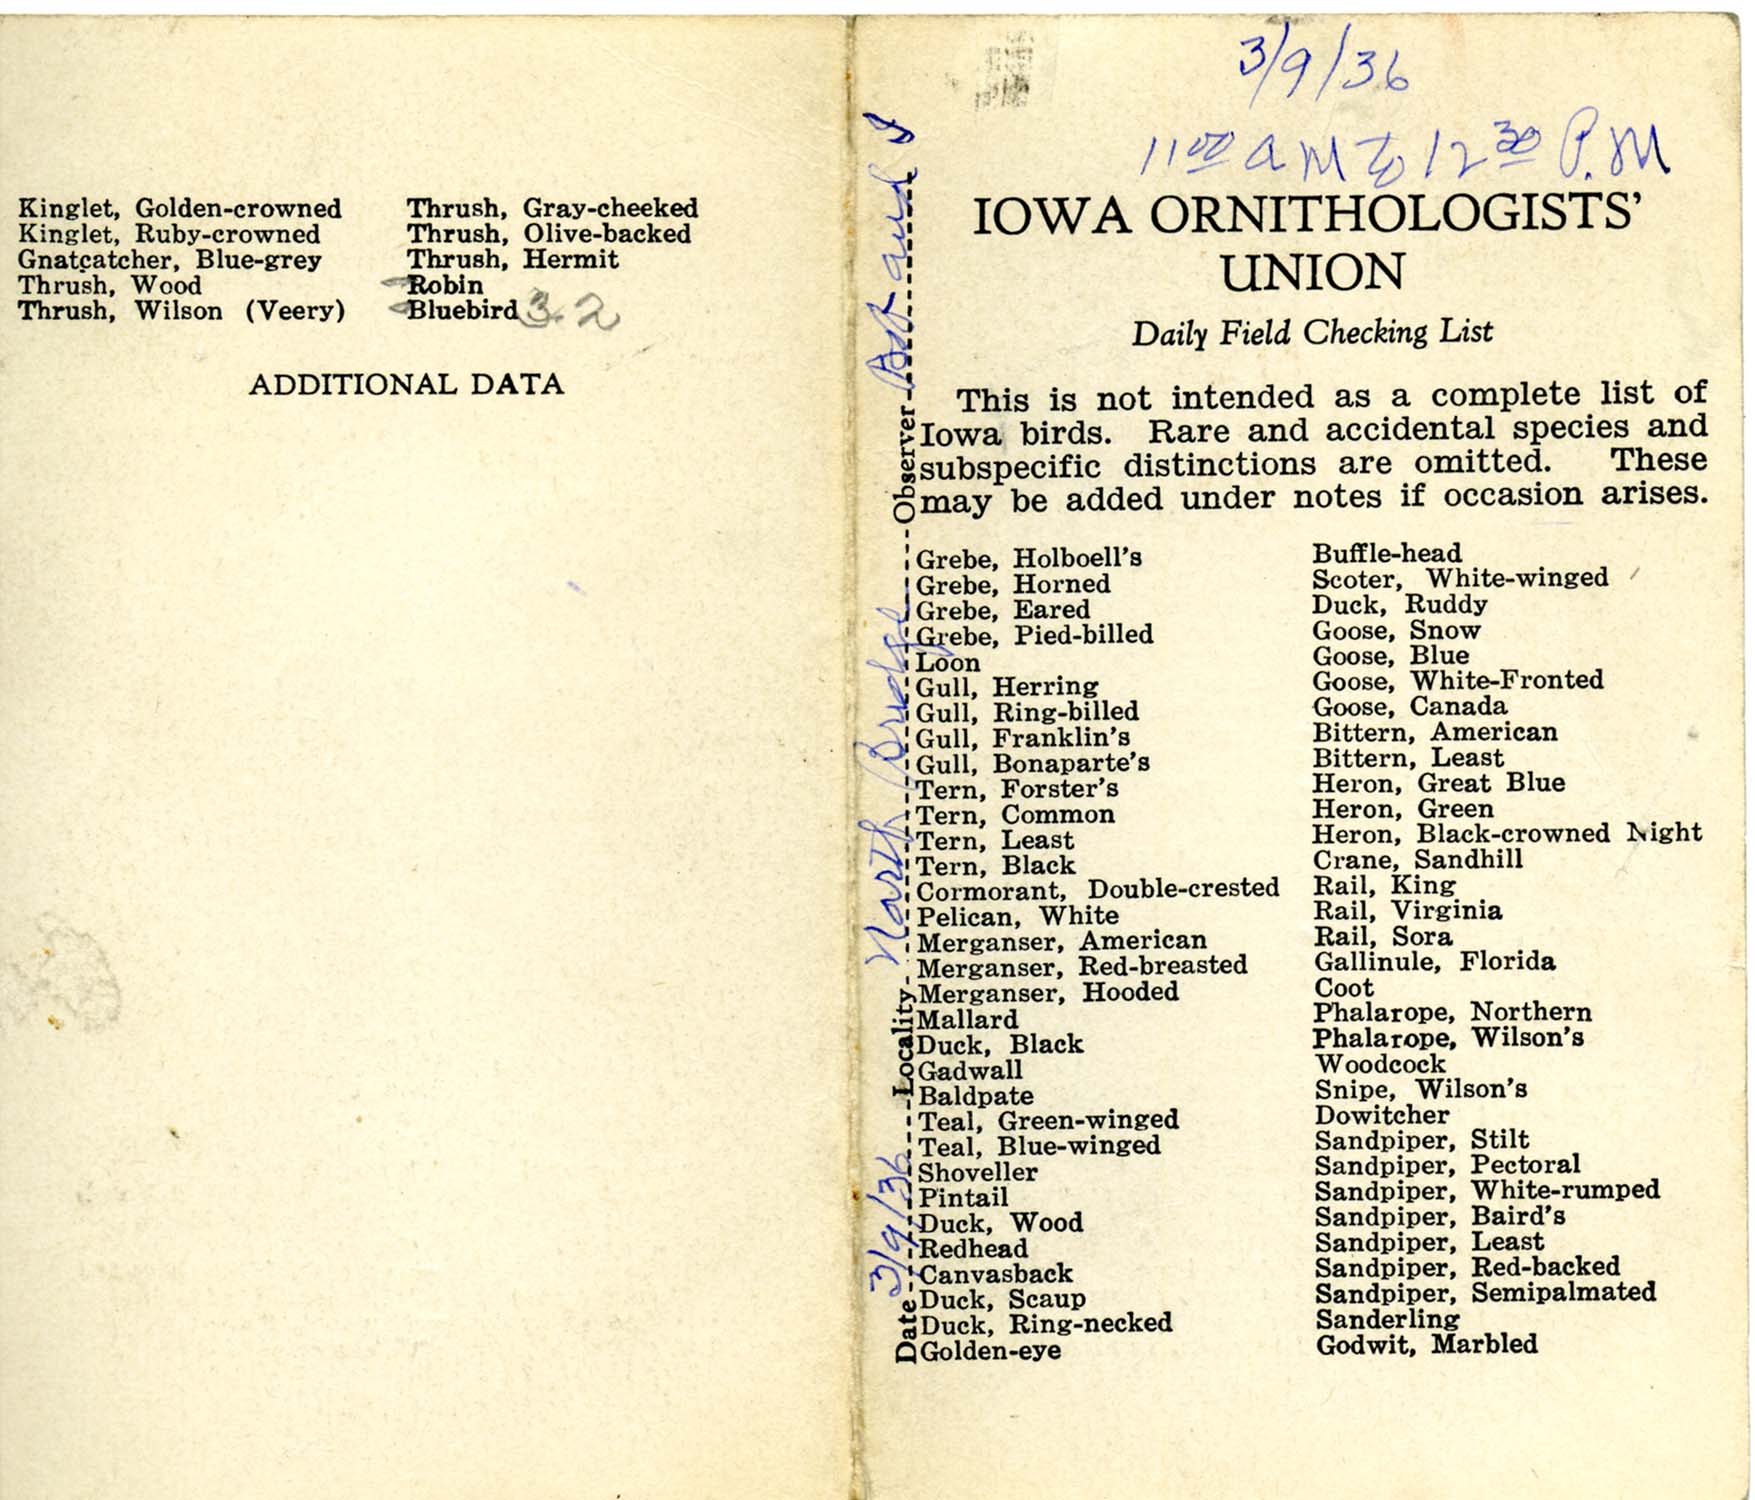 Daily field checking list by Walter Rosene, March 9, 1936